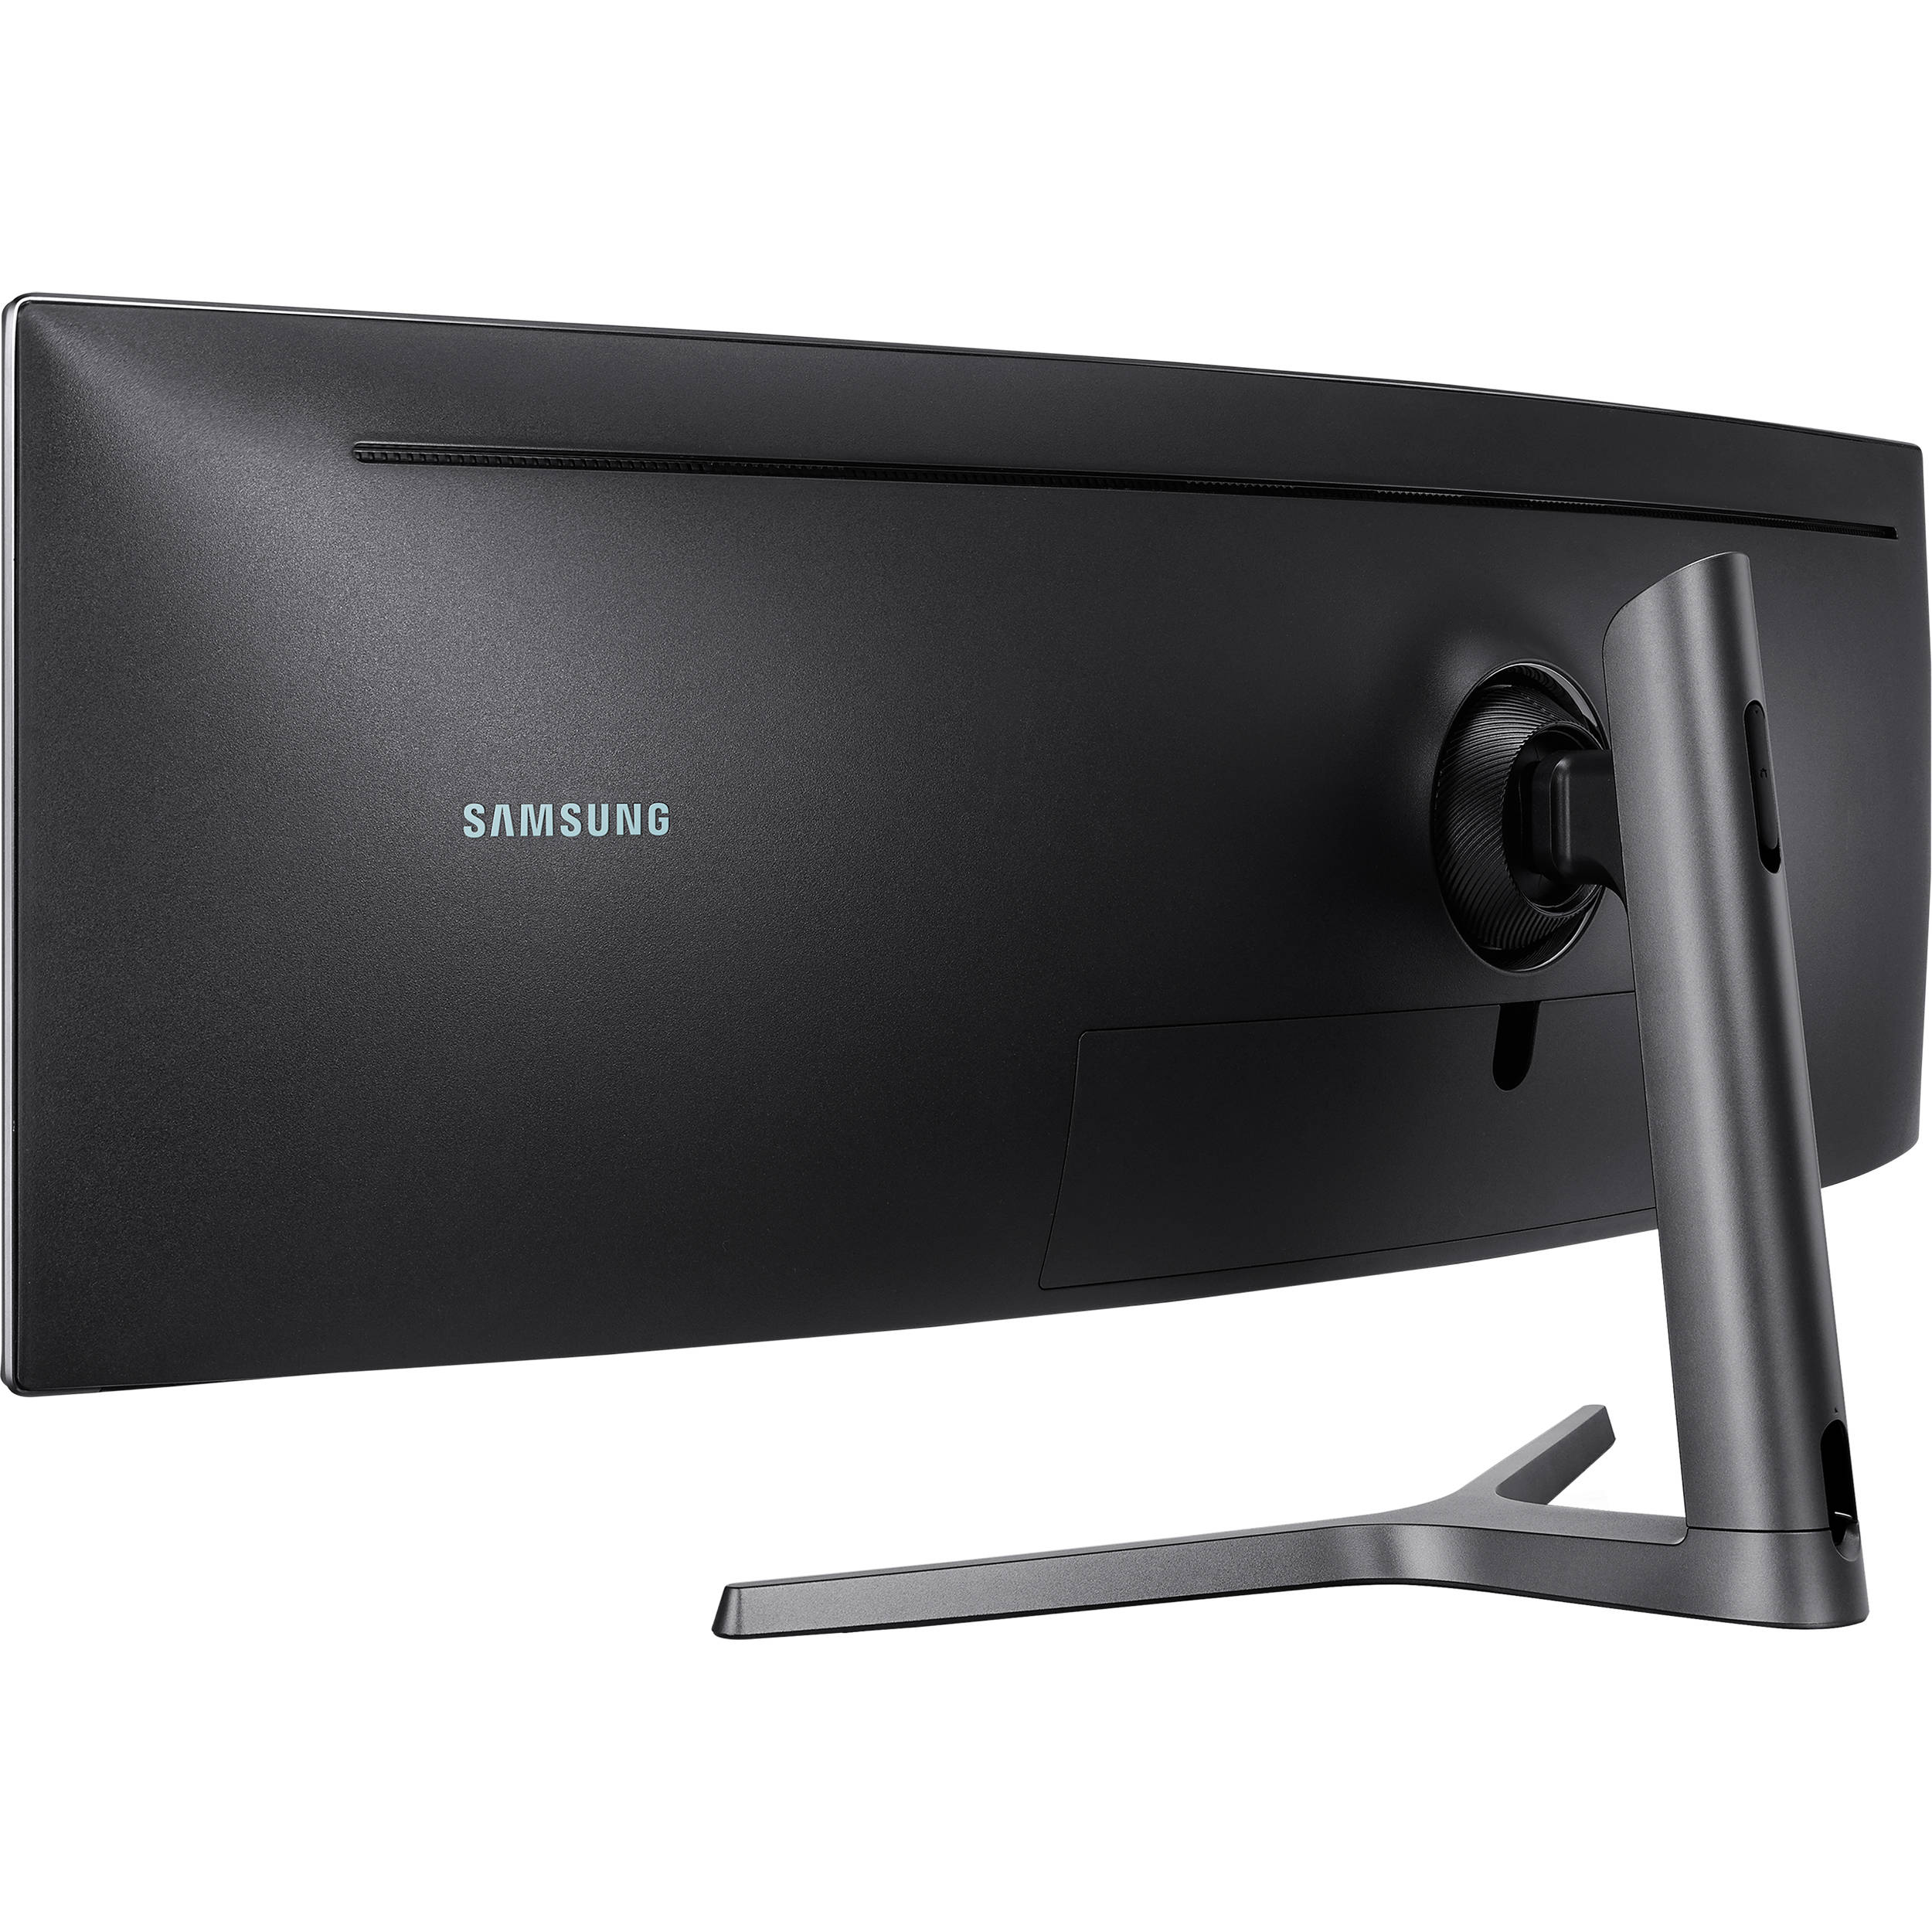 Samsung LC49RG92SSNXZA 49" Dual QHD Curved 5120 x 1440 120Hz QLED Gaming Monitor - Certified Refurbished